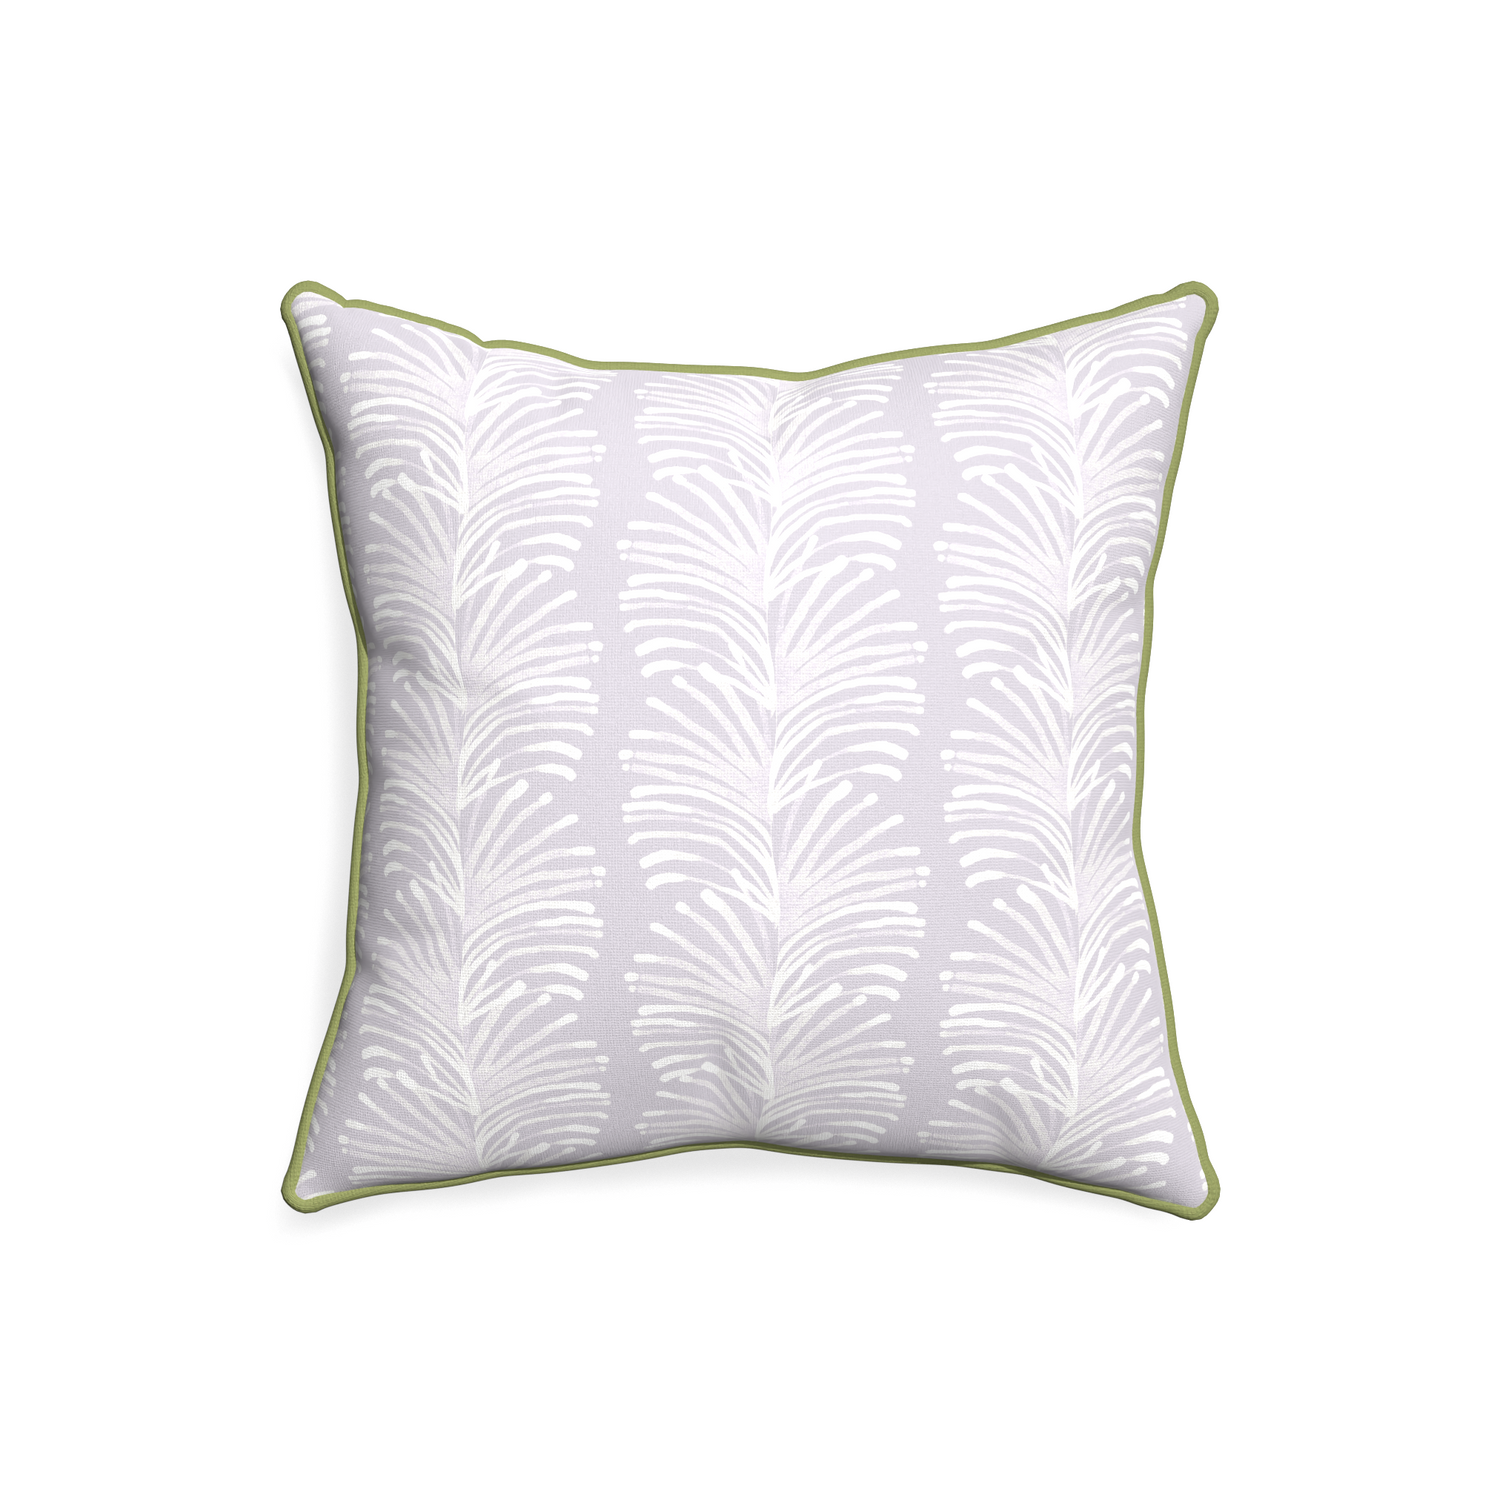 20-square emma lavender custom lavender botanical stripepillow with moss piping on white background